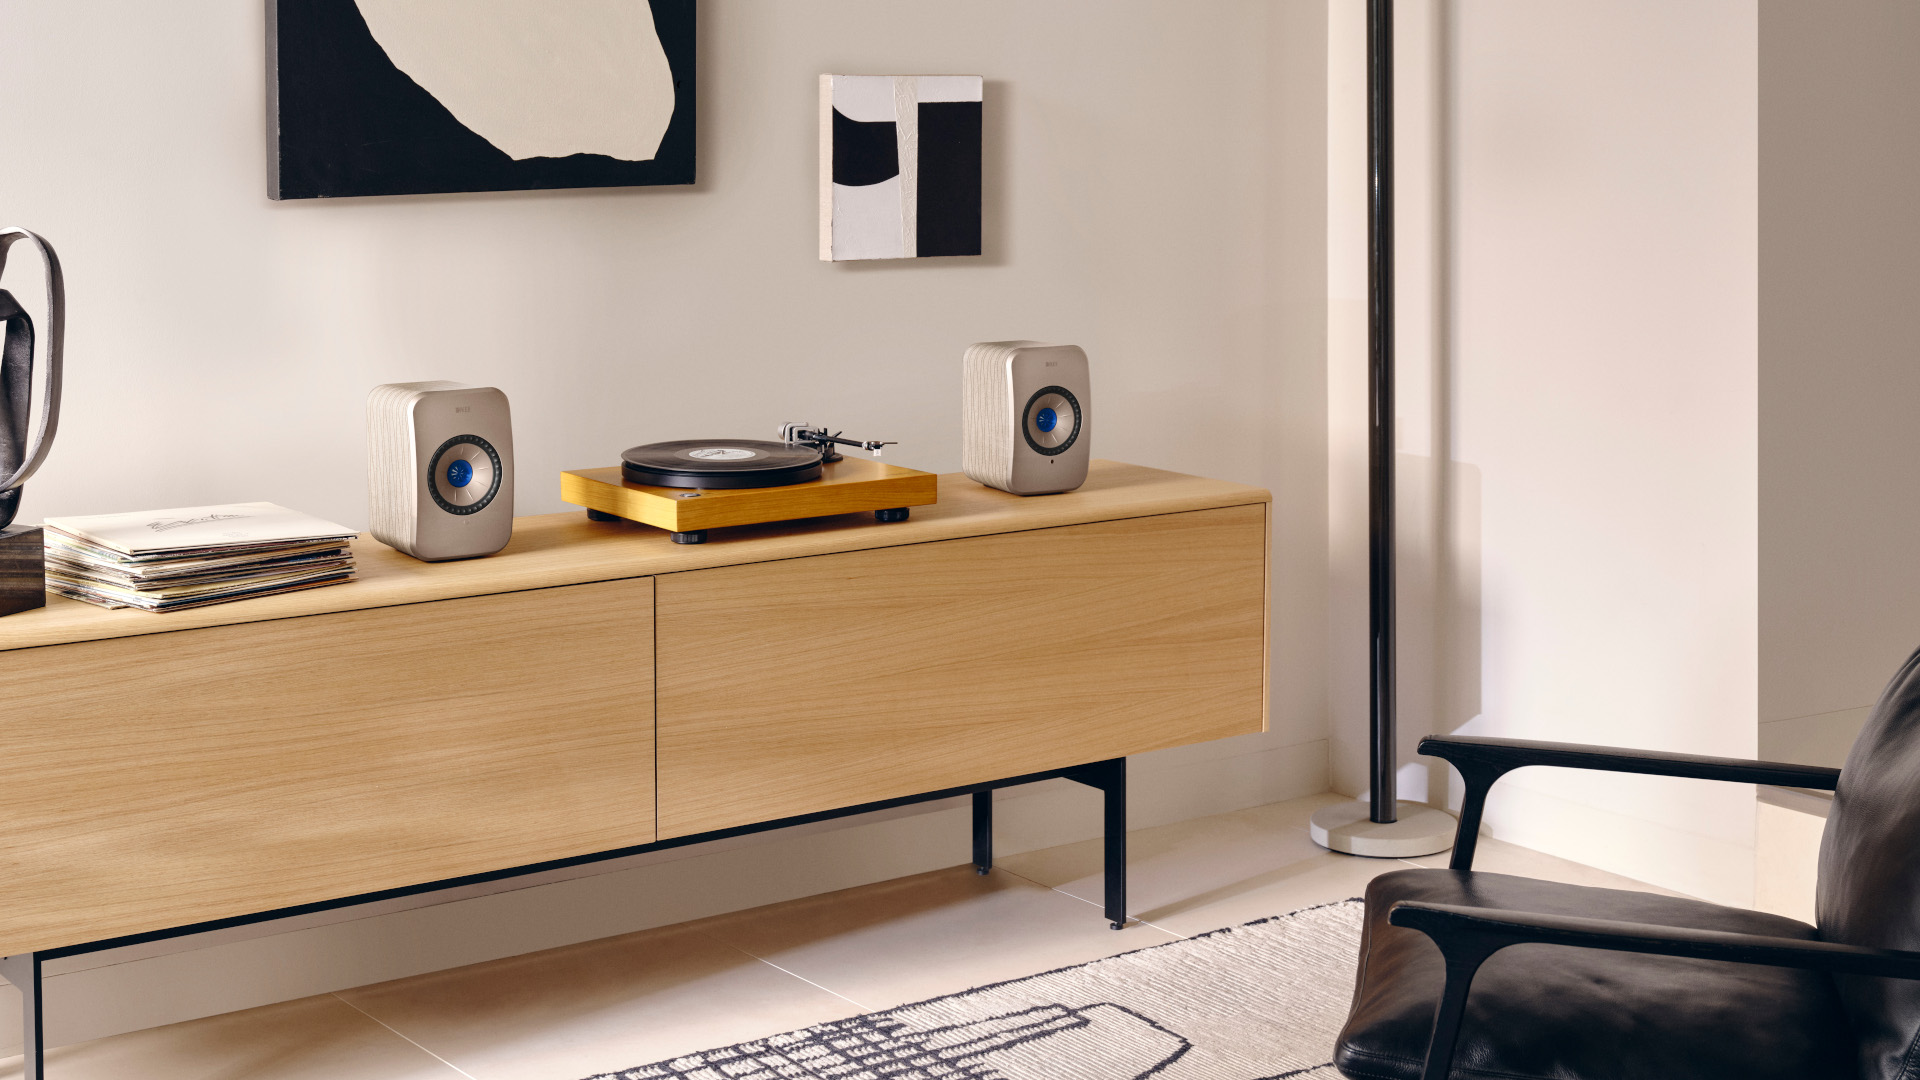 The KEF LSX II next to a turntable.